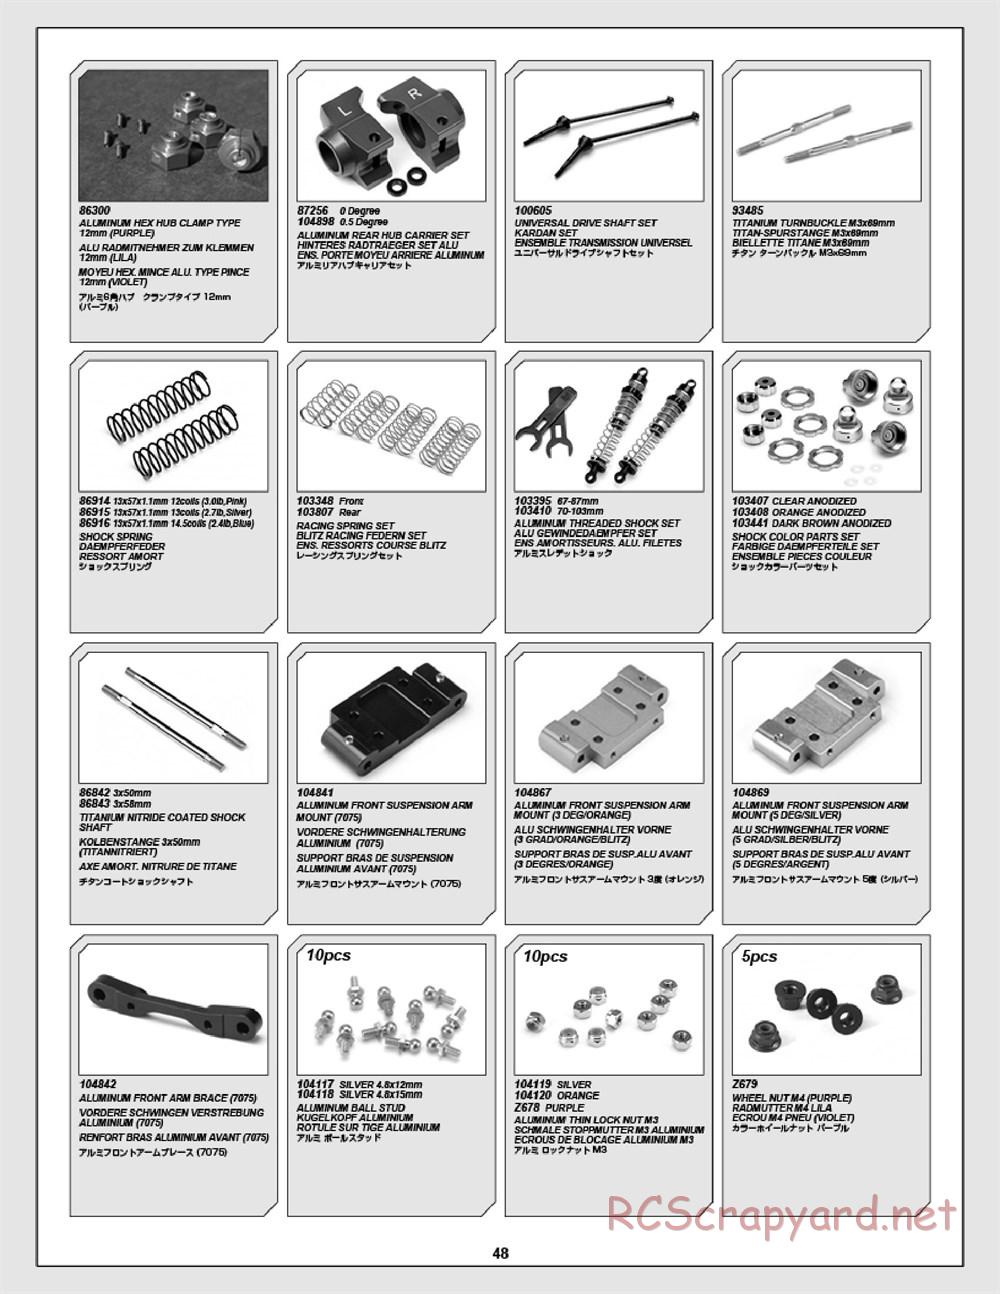 HPI - E-Firestorm 10T Flux - Exploded View - Page 48